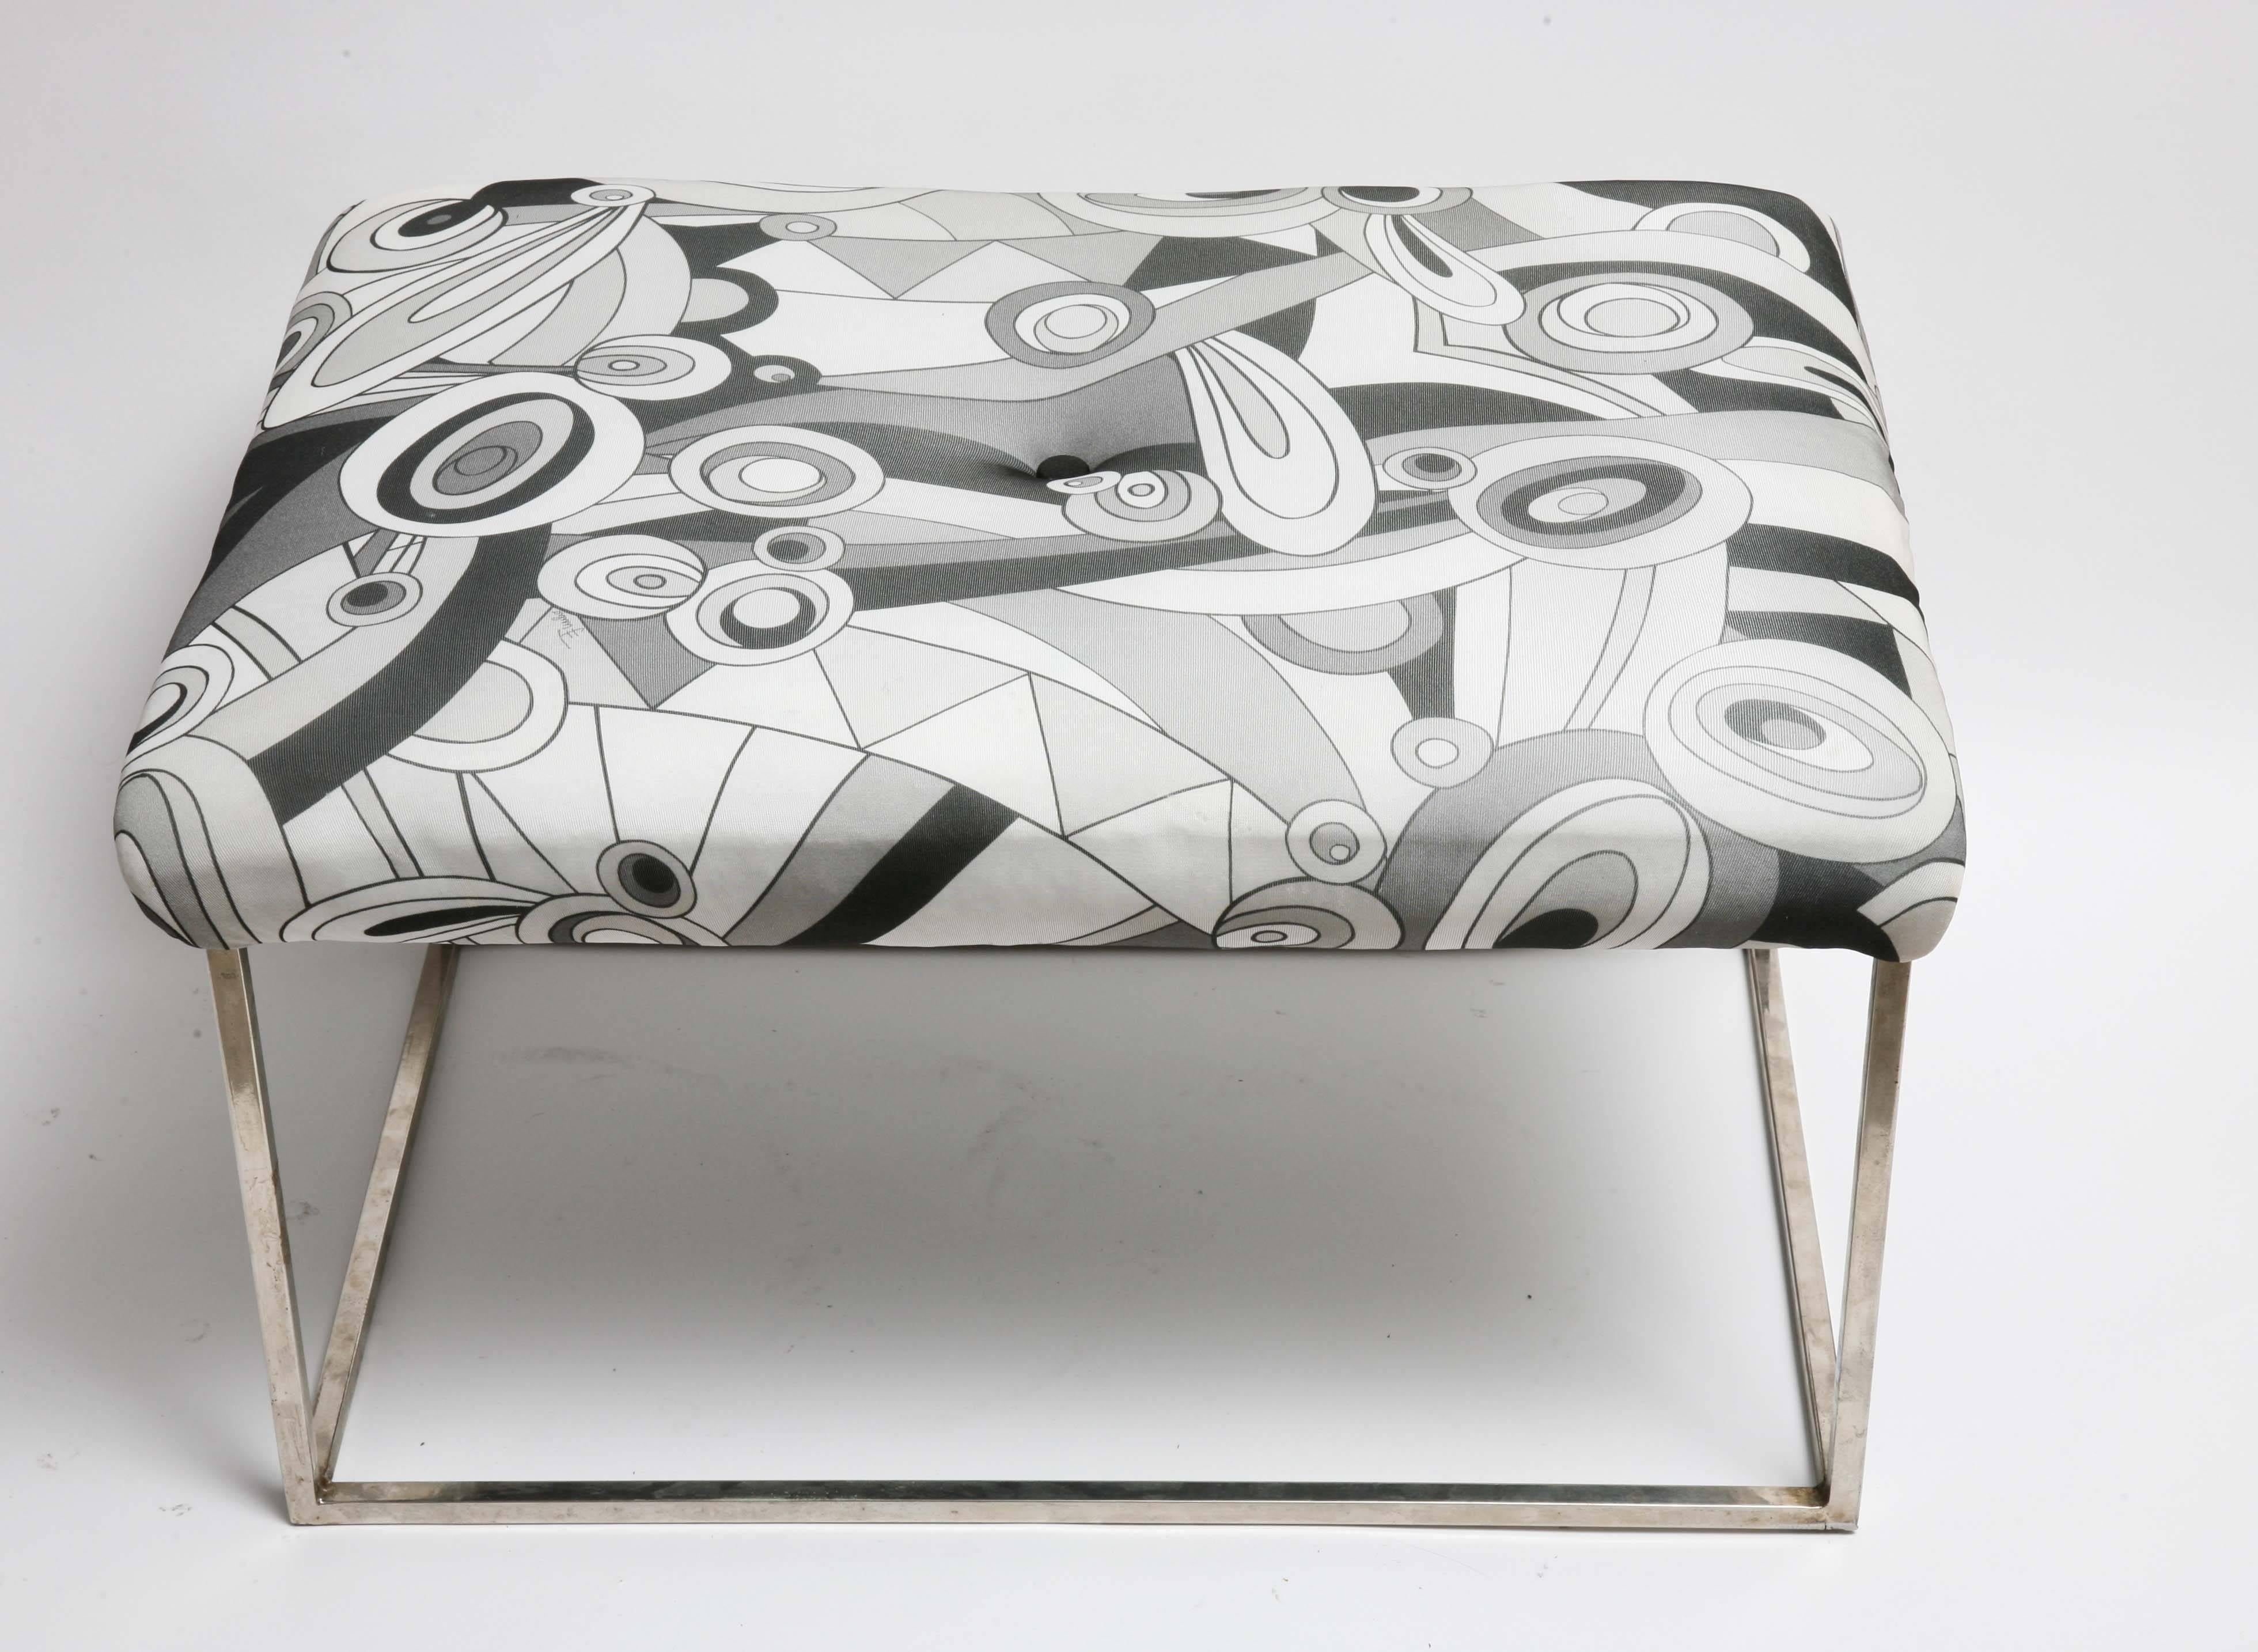 Plated Pair of Mid-Century Modern Baughman Chrome Pucci Fabric Stools or Benches For Sale